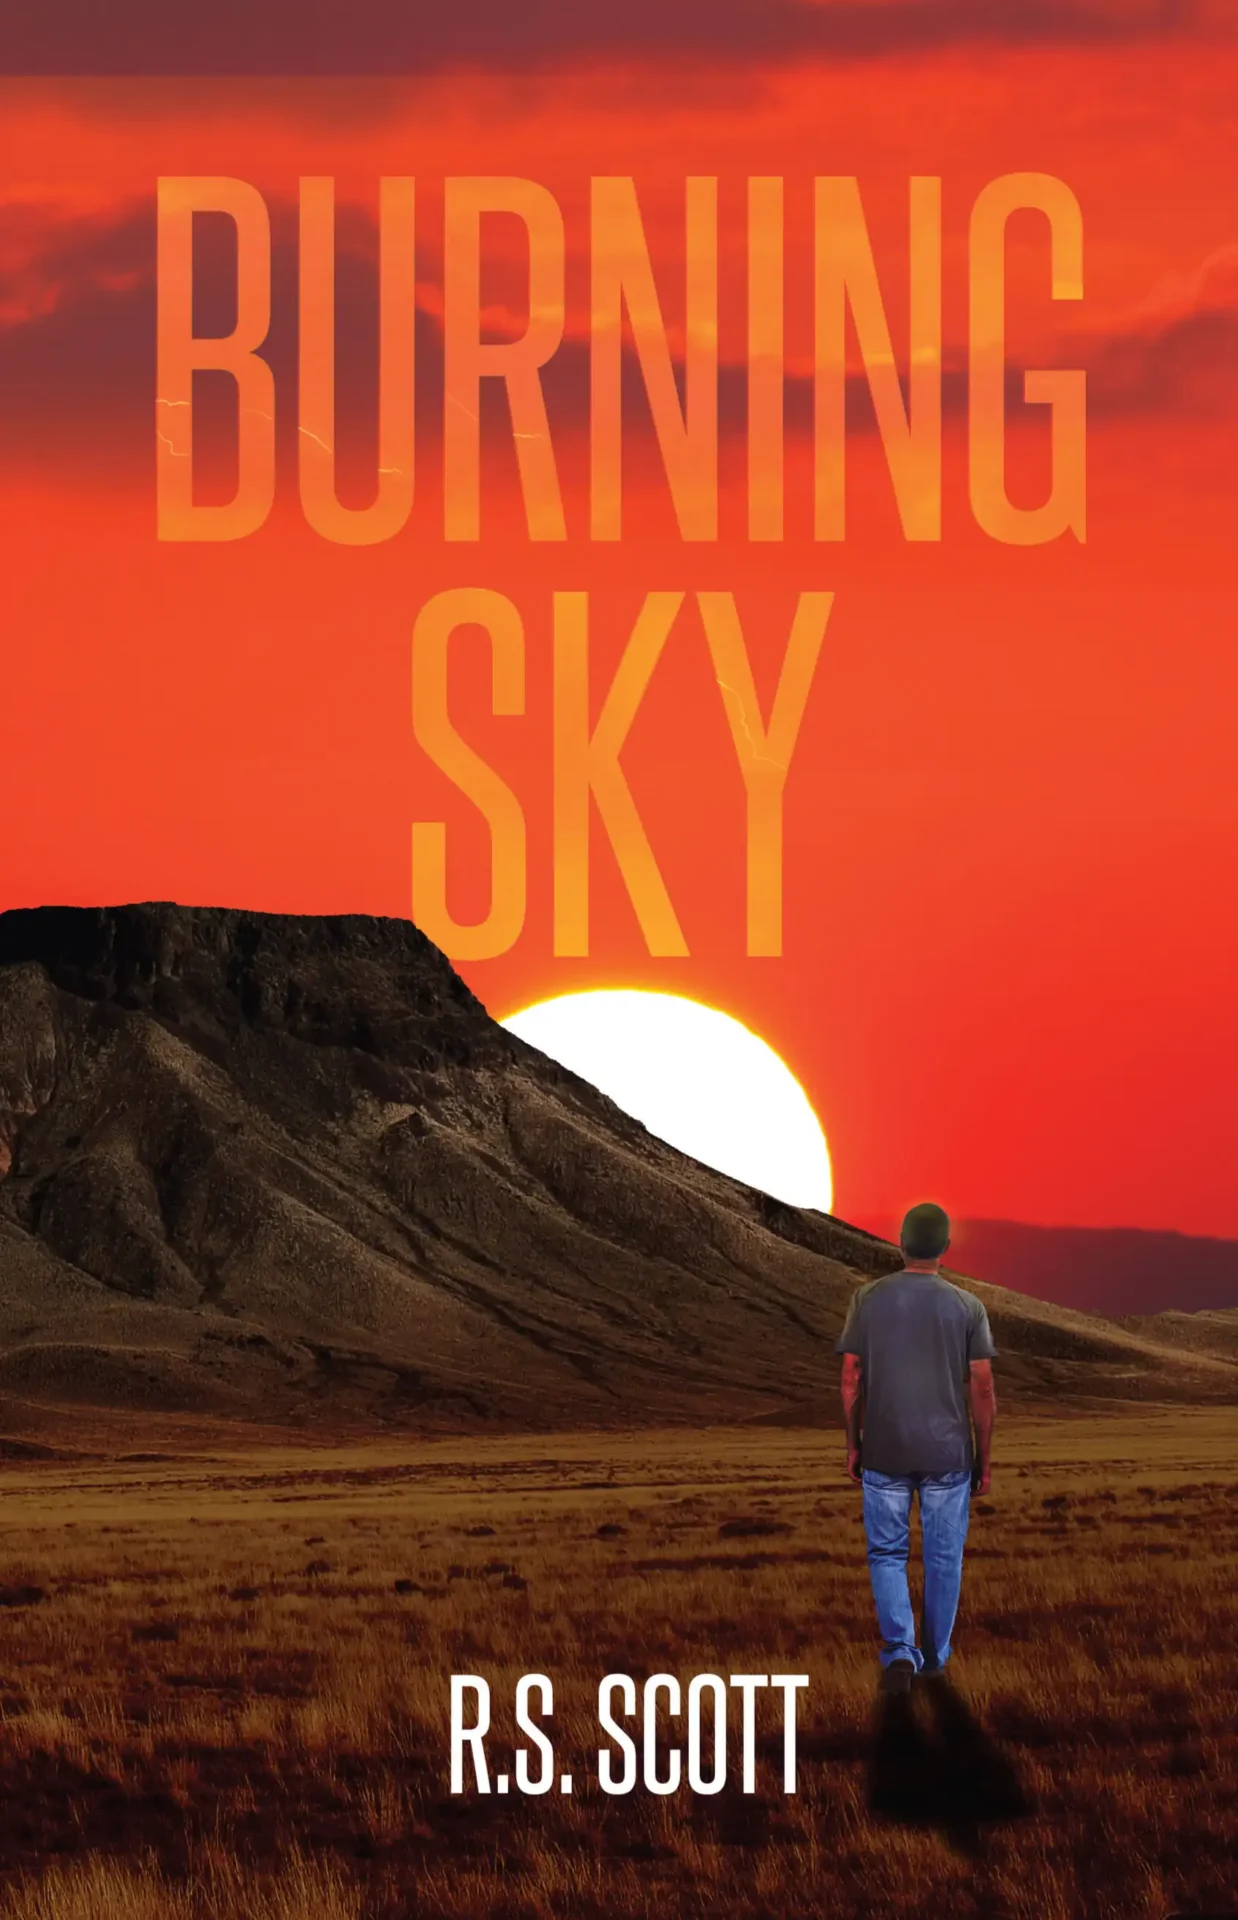 Book cover of Burning Sky by R.S. Scott